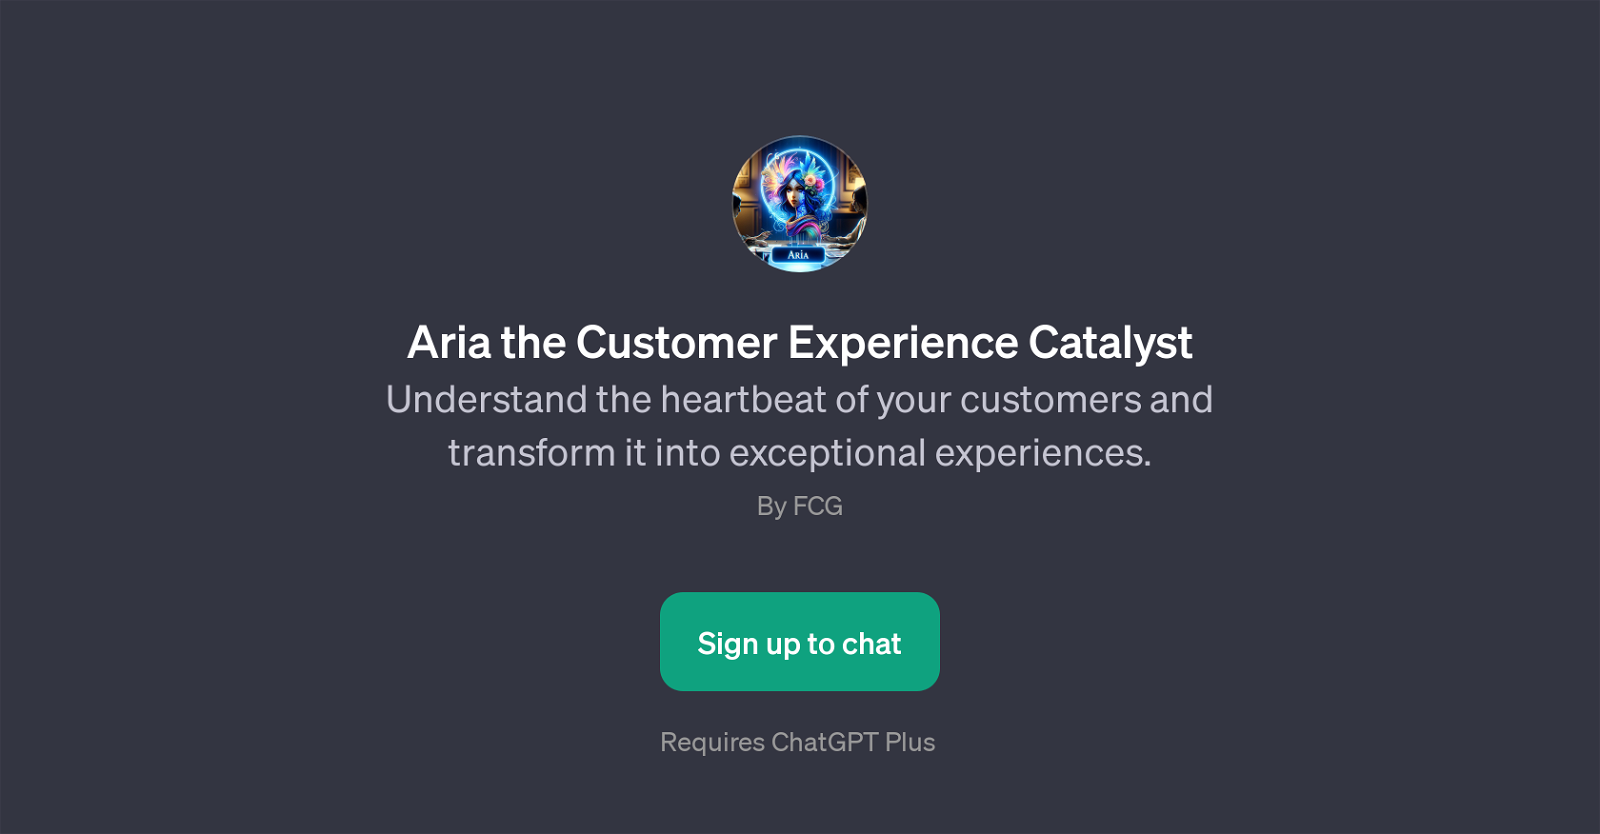 Aria the Customer Experience Catalyst website